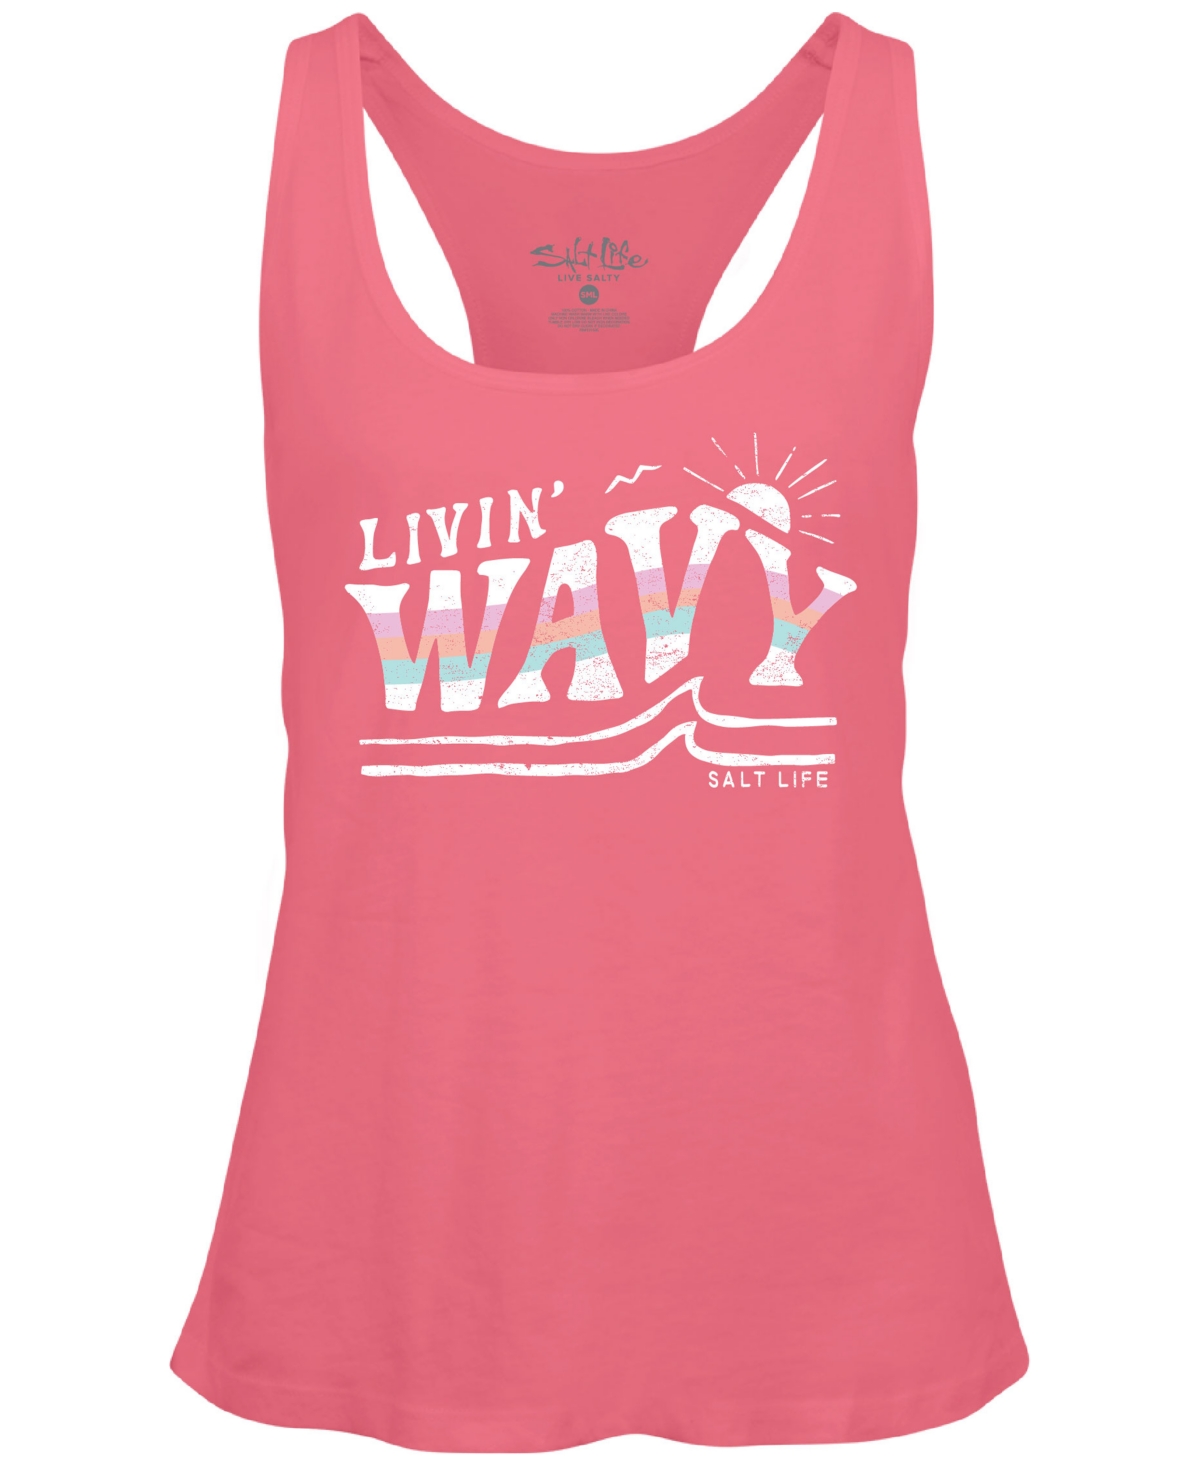 Women's In The Curl Cotton Racerback Tank Top - Washed Navy